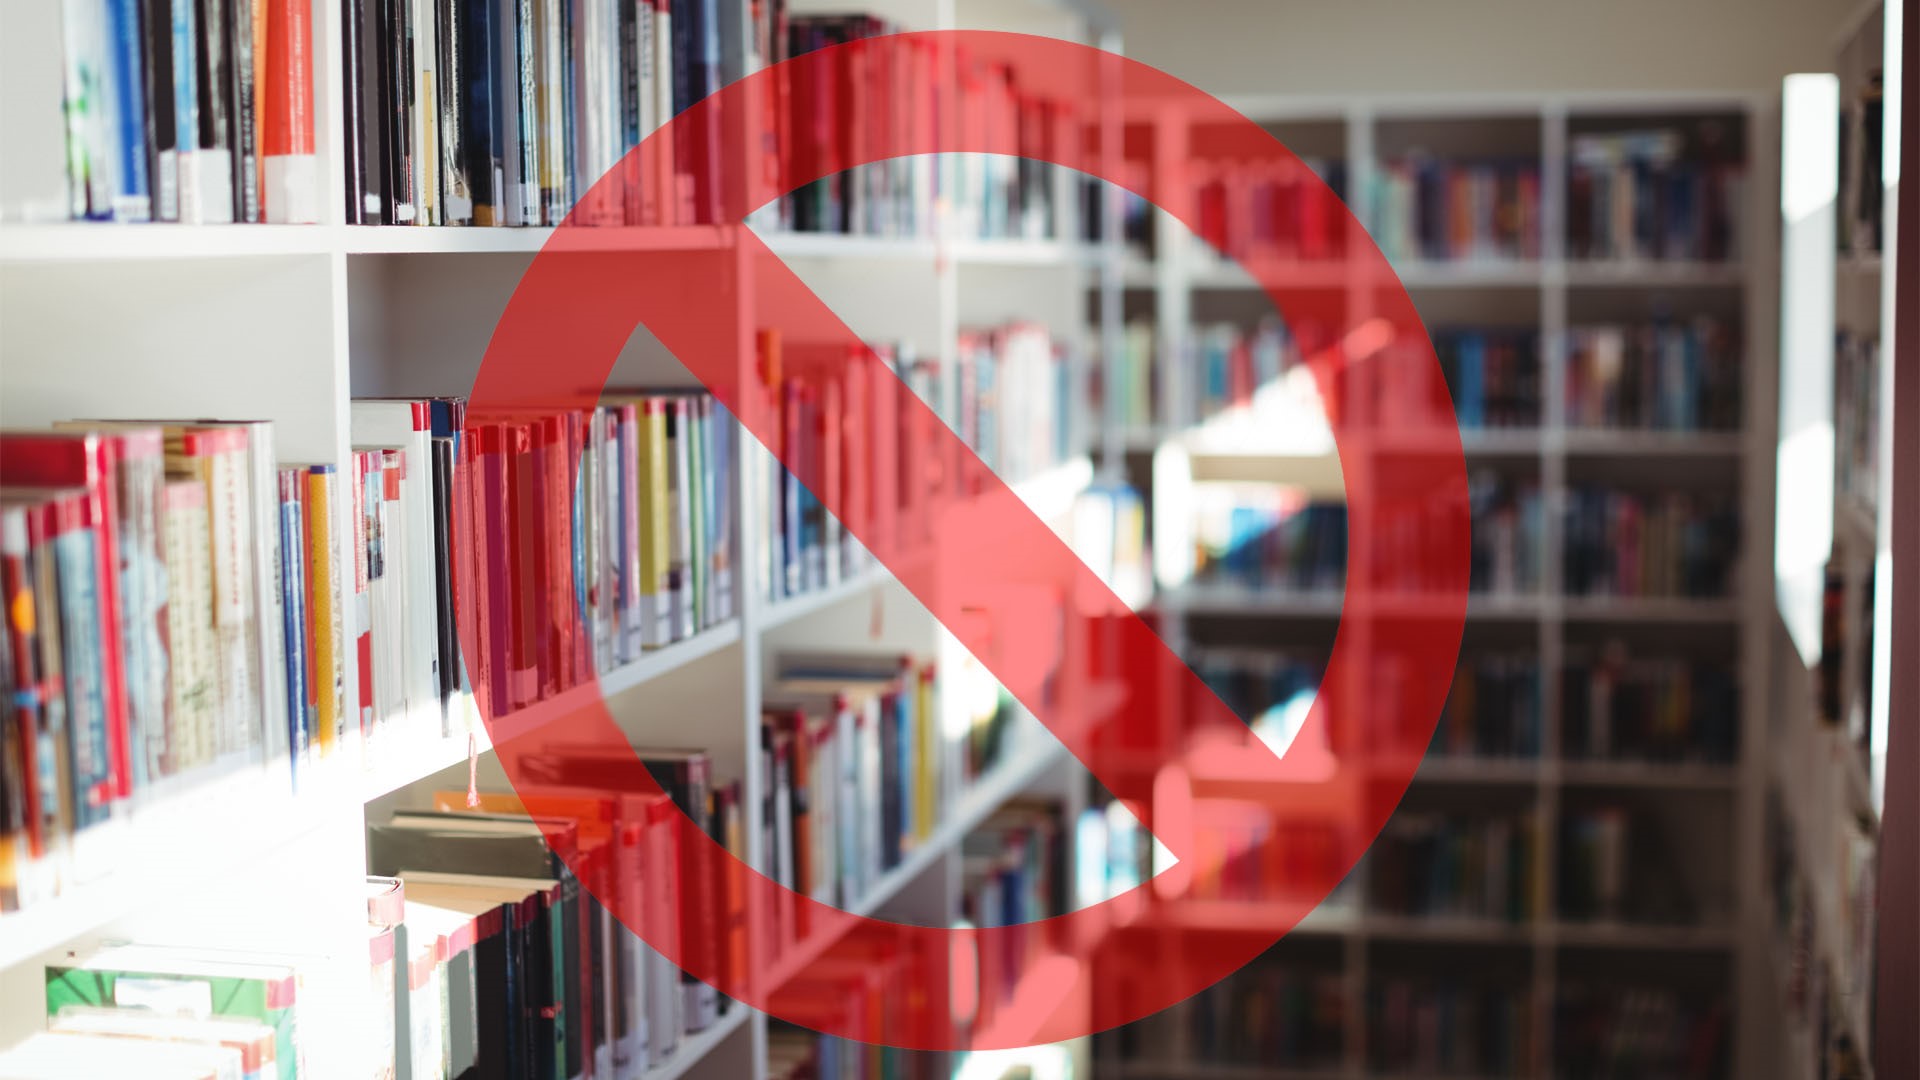 The American Library Association (ALA) has released the latest list of banned and challenged books that show LGBTQ+ themes as being the most targeted.